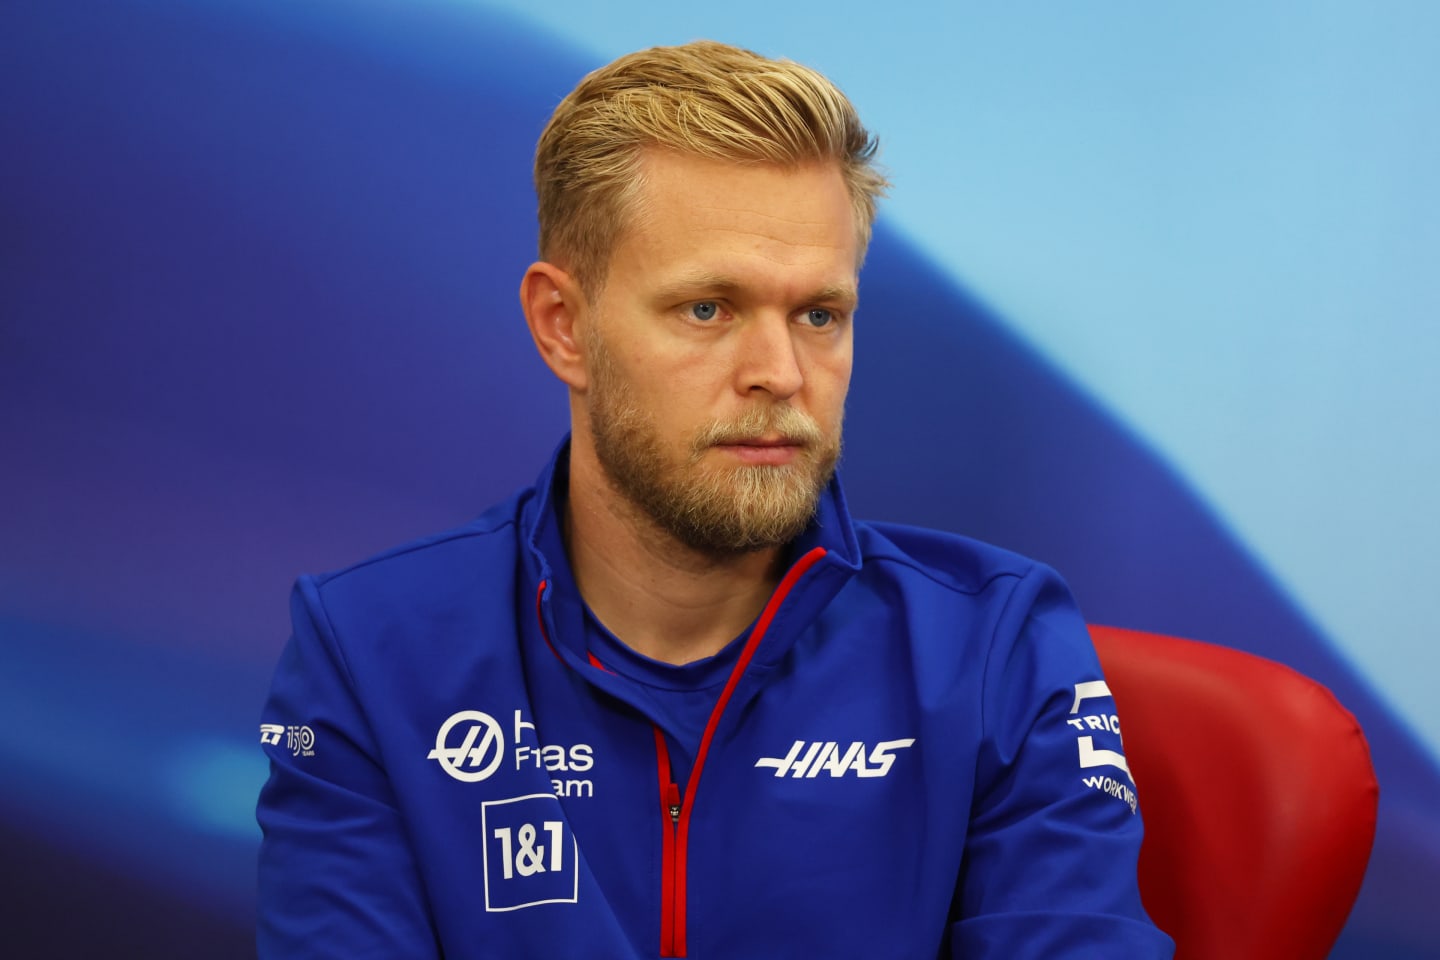 SUZUKA, JAPAN - OCTOBER 06: Kevin Magnussen of Denmark and Haas F1 attends the Drivers Press Conference during previews ahead of the F1 Grand Prix of Japan at Suzuka International Racing Course on October 06, 2022 in Suzuka, Japan. (Photo by Bryn Lennon/Getty Images)